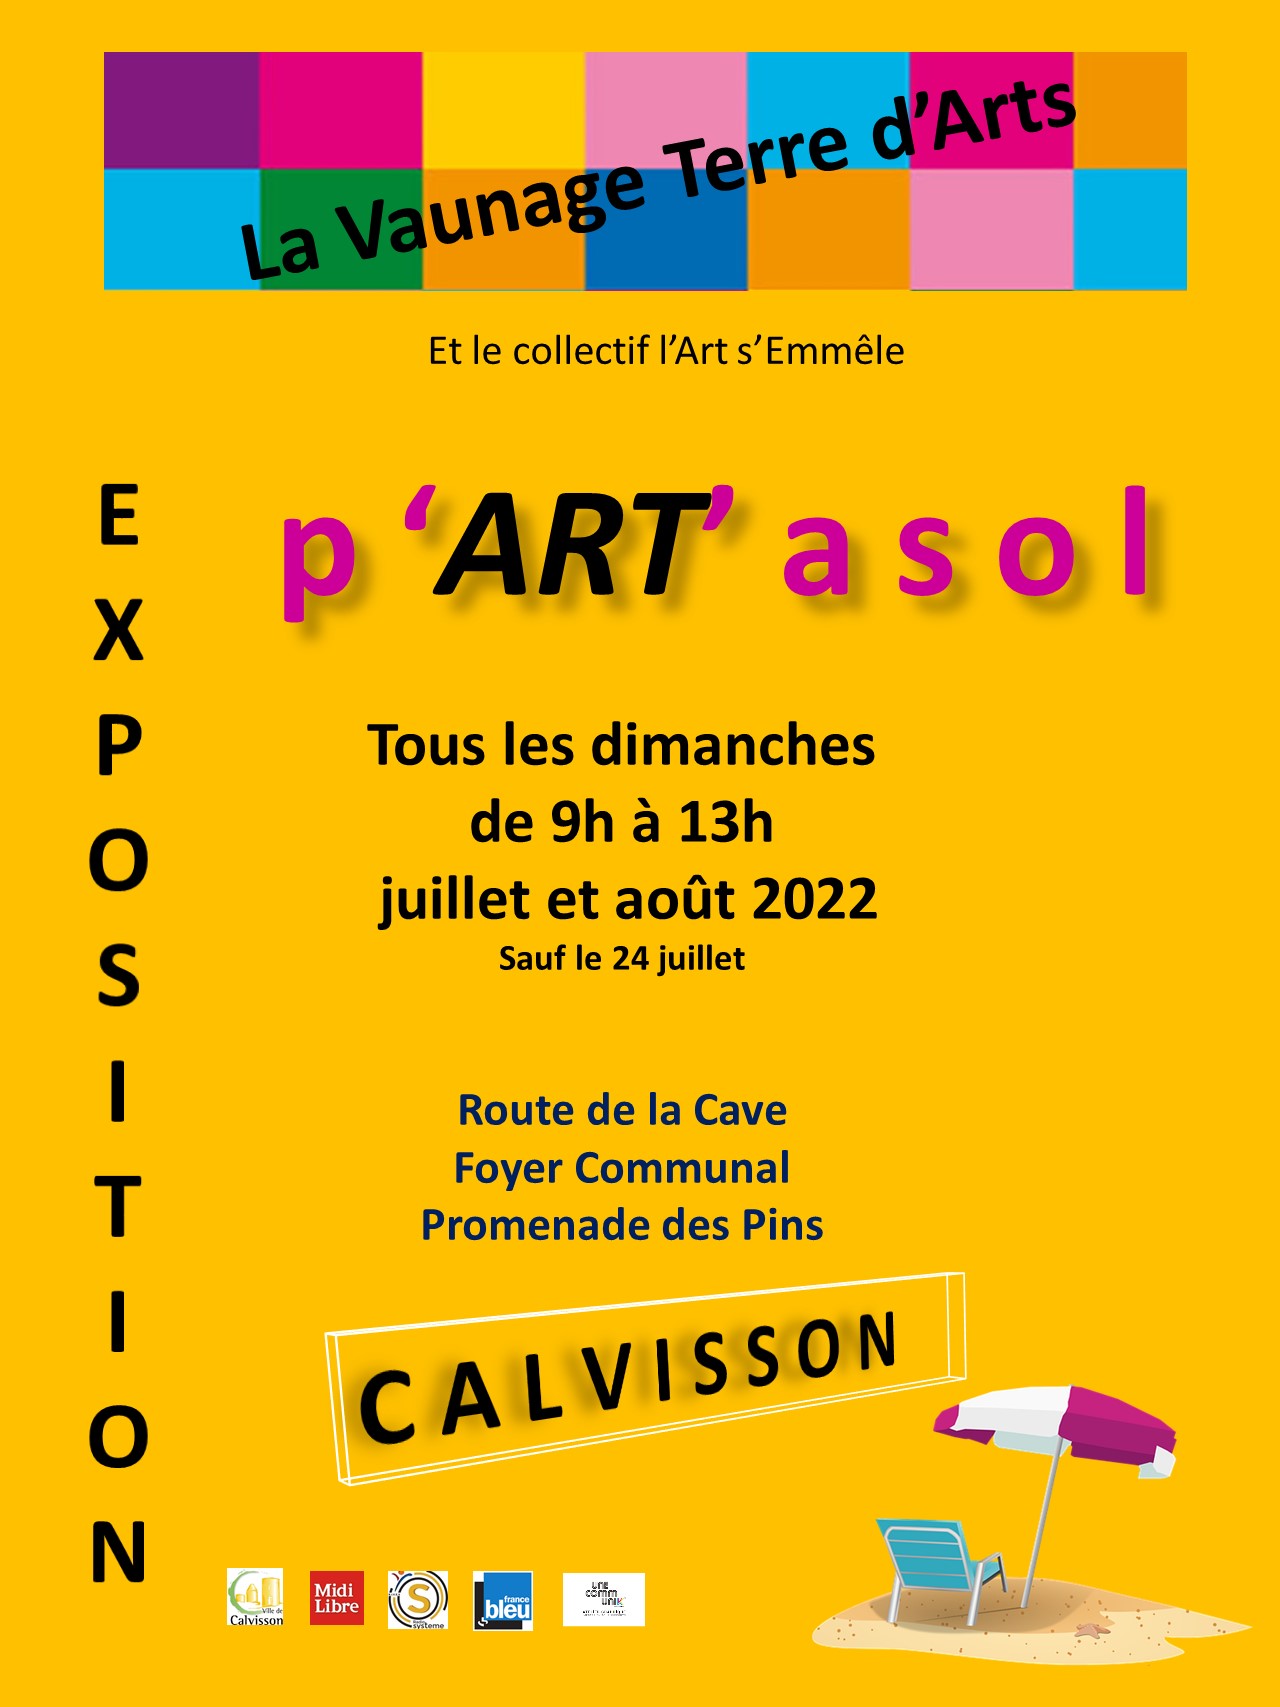 You are currently viewing pARTasol 2022 à Calvisson